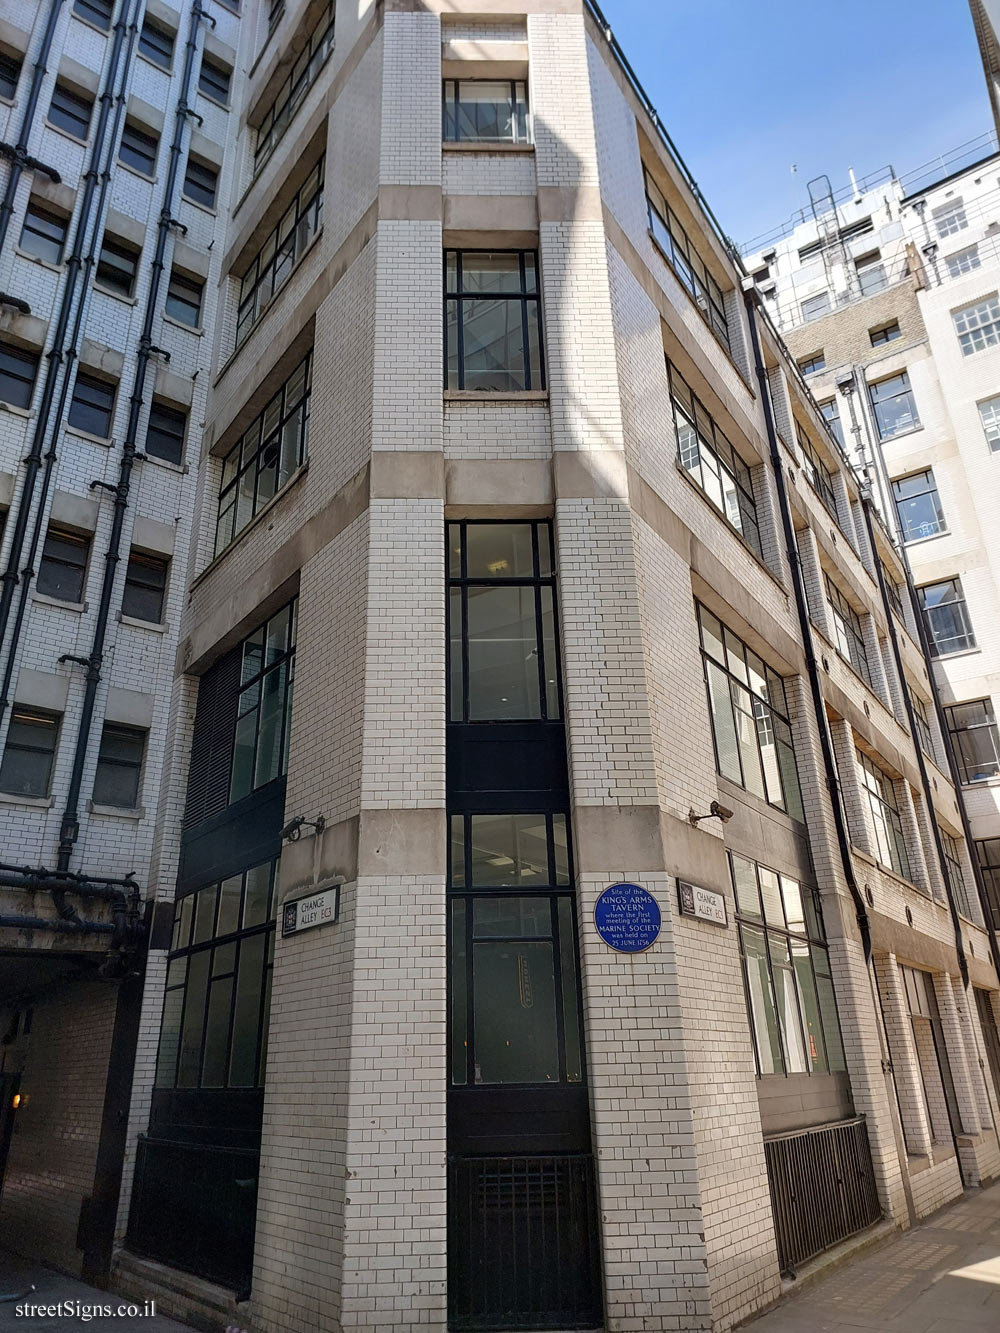 London - A commemorative sign at the place of founding meeting of The Marine Society - 4, off Change Alley, Lombard St, London EC3V 9AZ, UK